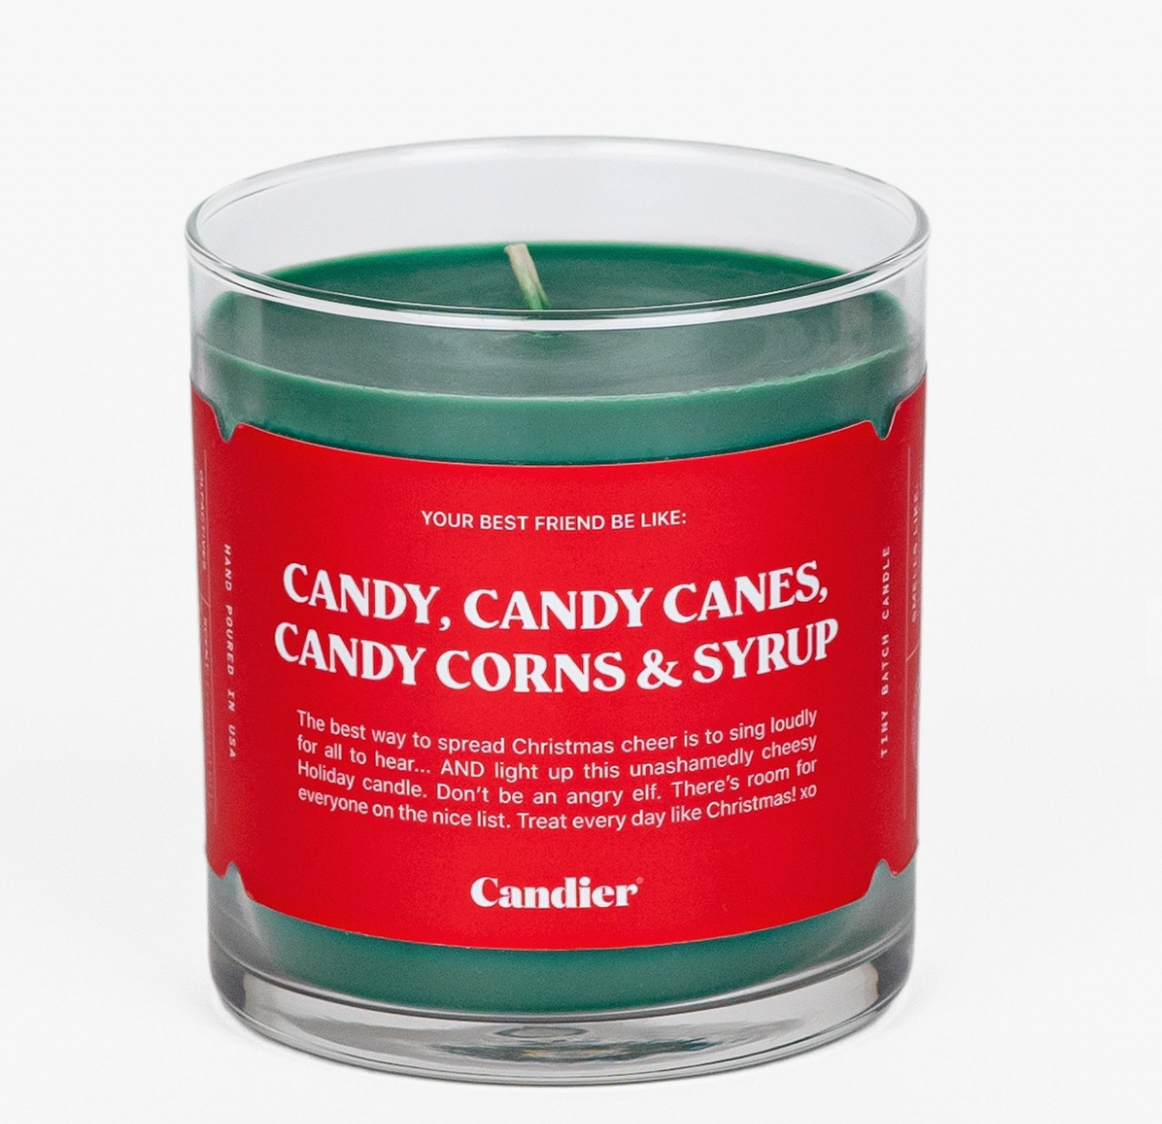 Holiday Candier "CANDY, CANDY CANES, CANDY CORNS & SYRUP" 100% soy green wax candles